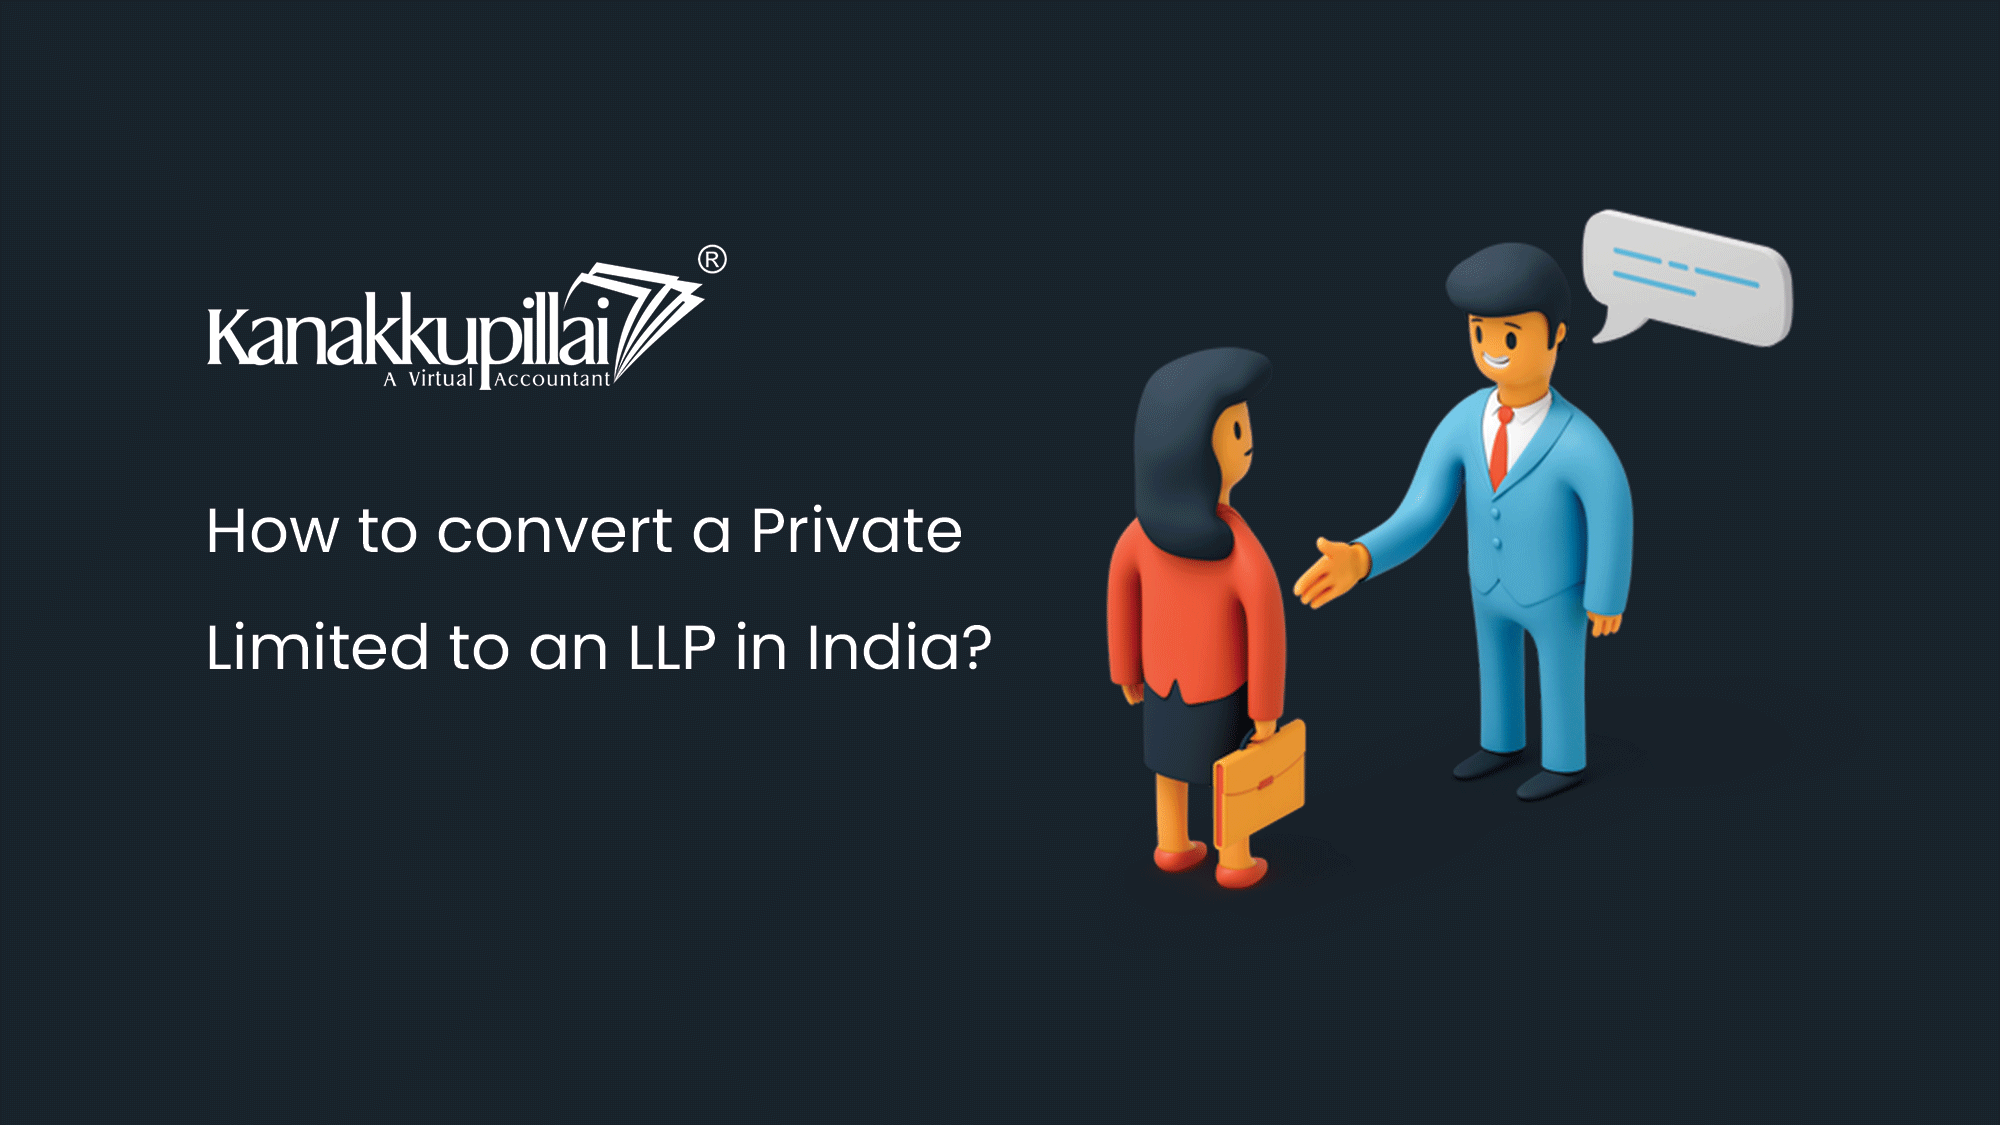 How to convert a Private Limited to an LLP in India?